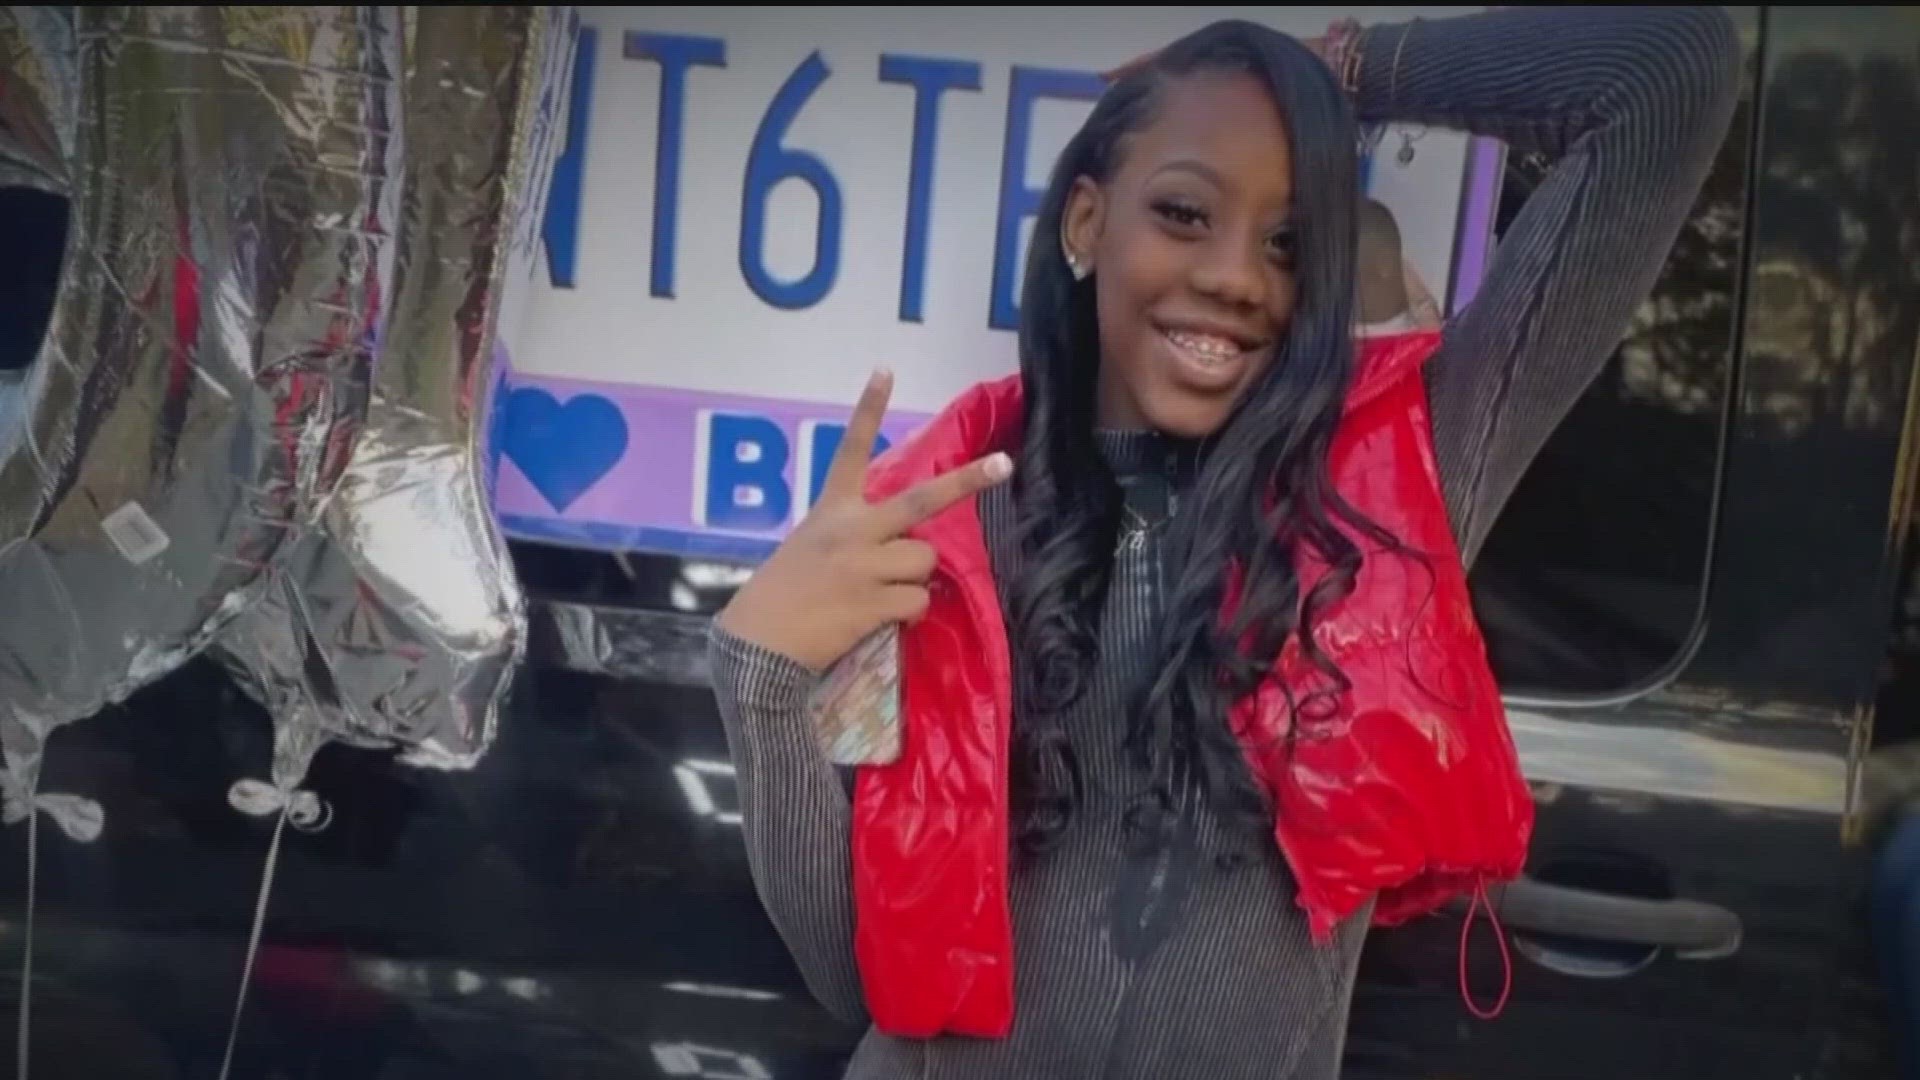 Next month will mark one year since the shooting death of Bre’Asia Powell, the 16-year-old killed outside of Mays High School. Another person has been indicted.